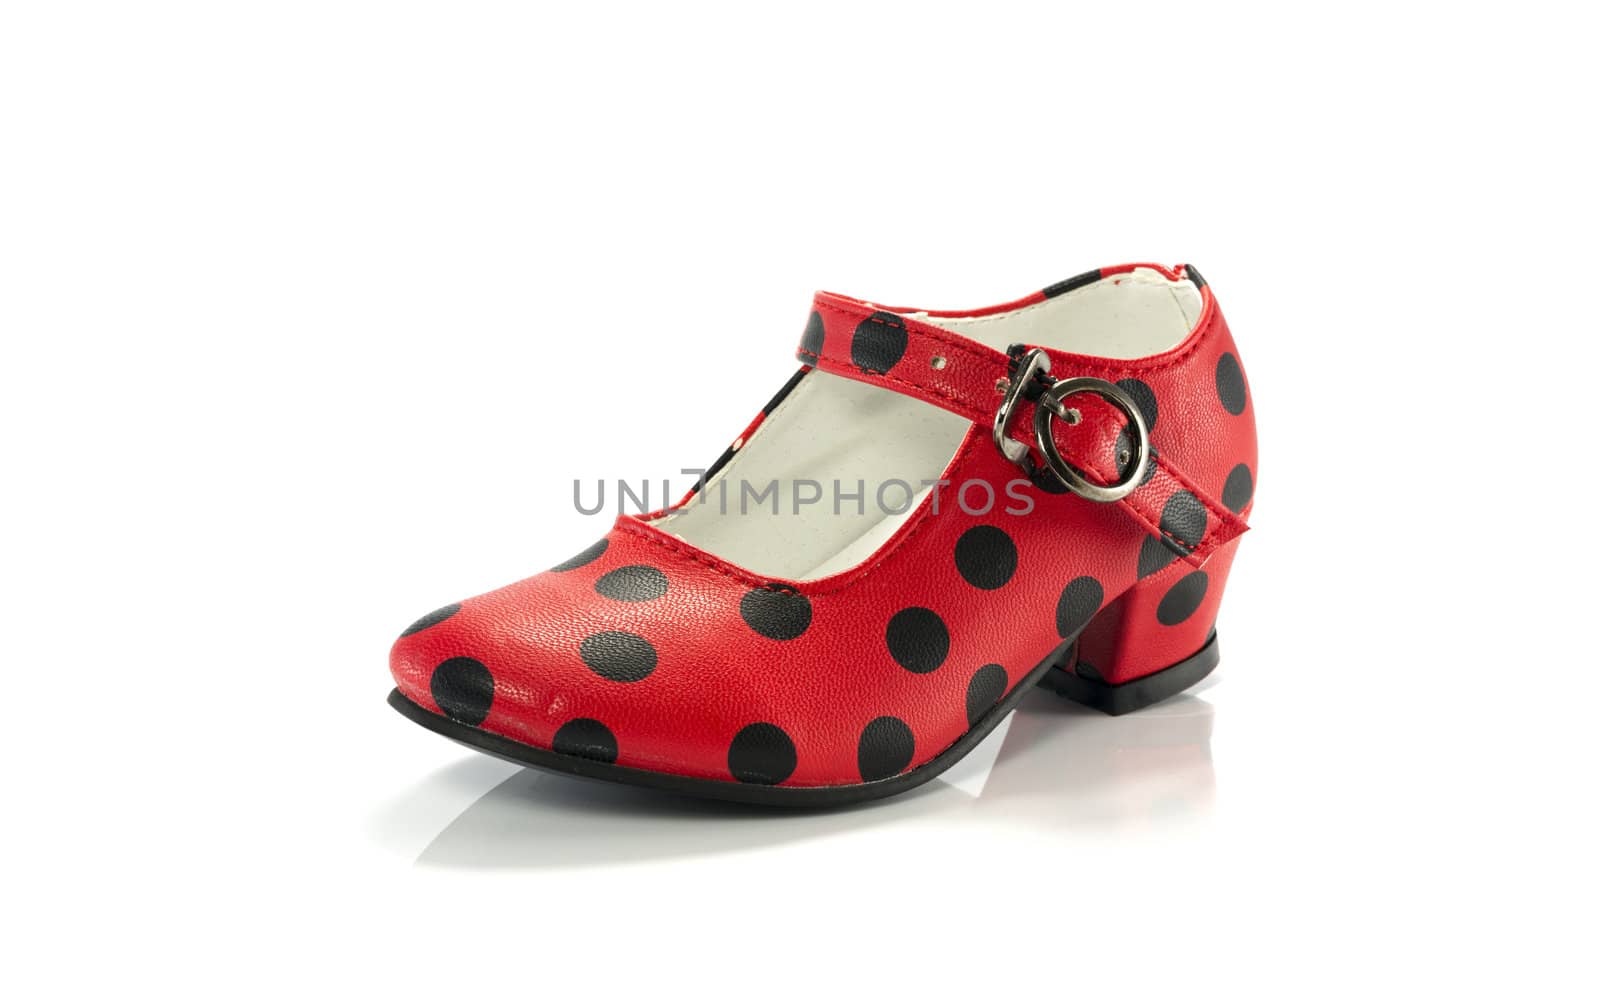 red shoe with black dots by compuinfoto